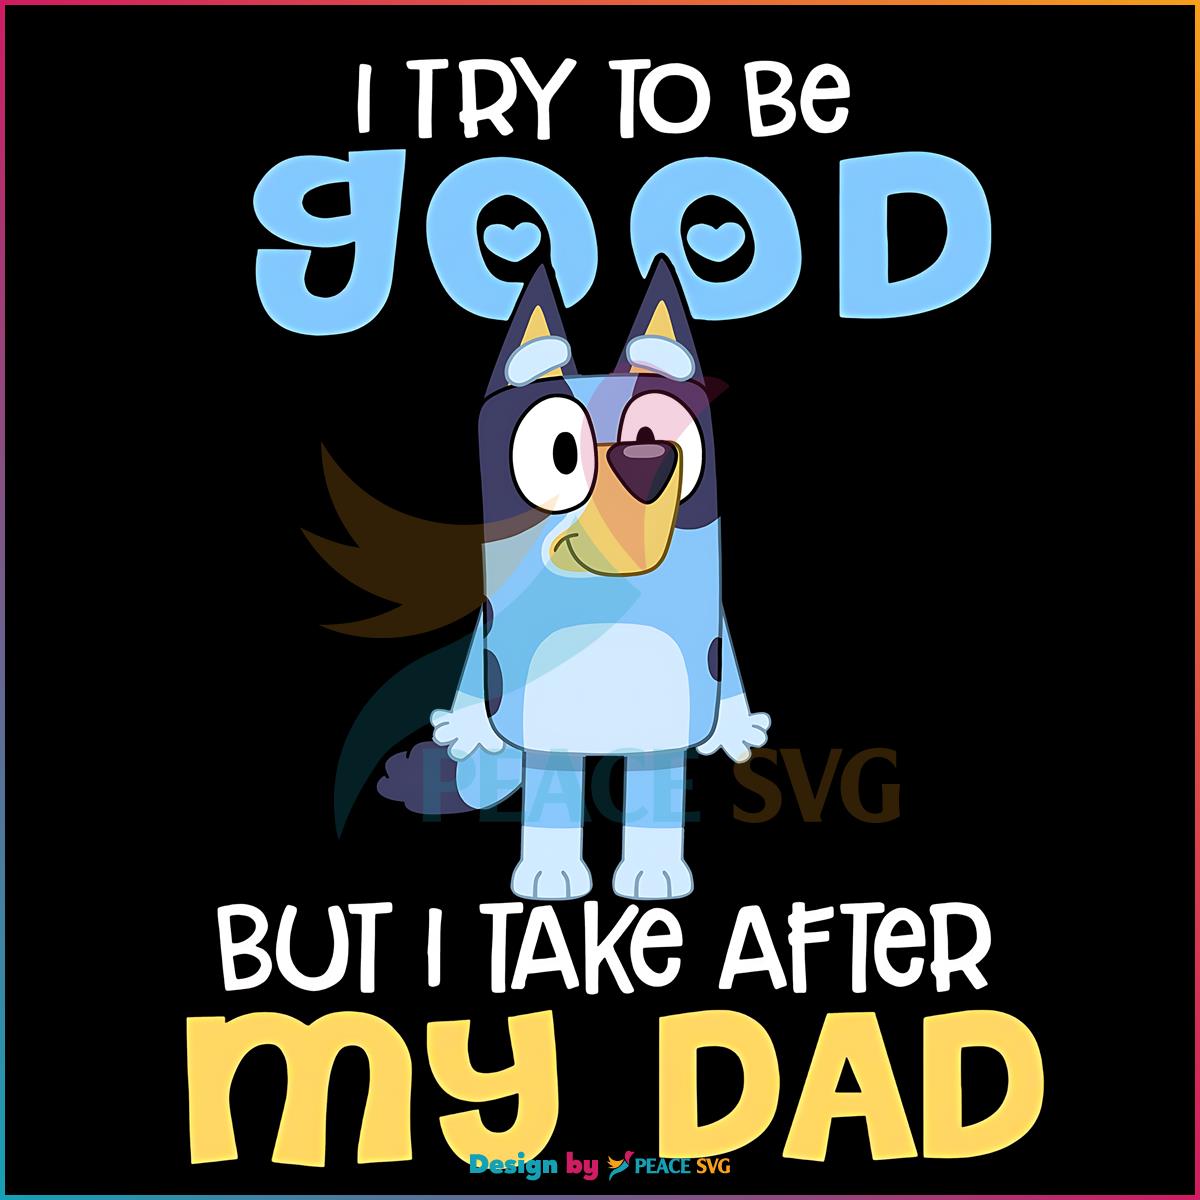 bluey-i-try-to-be-good-but-i-take-after-my-dad-png-silhouette-files